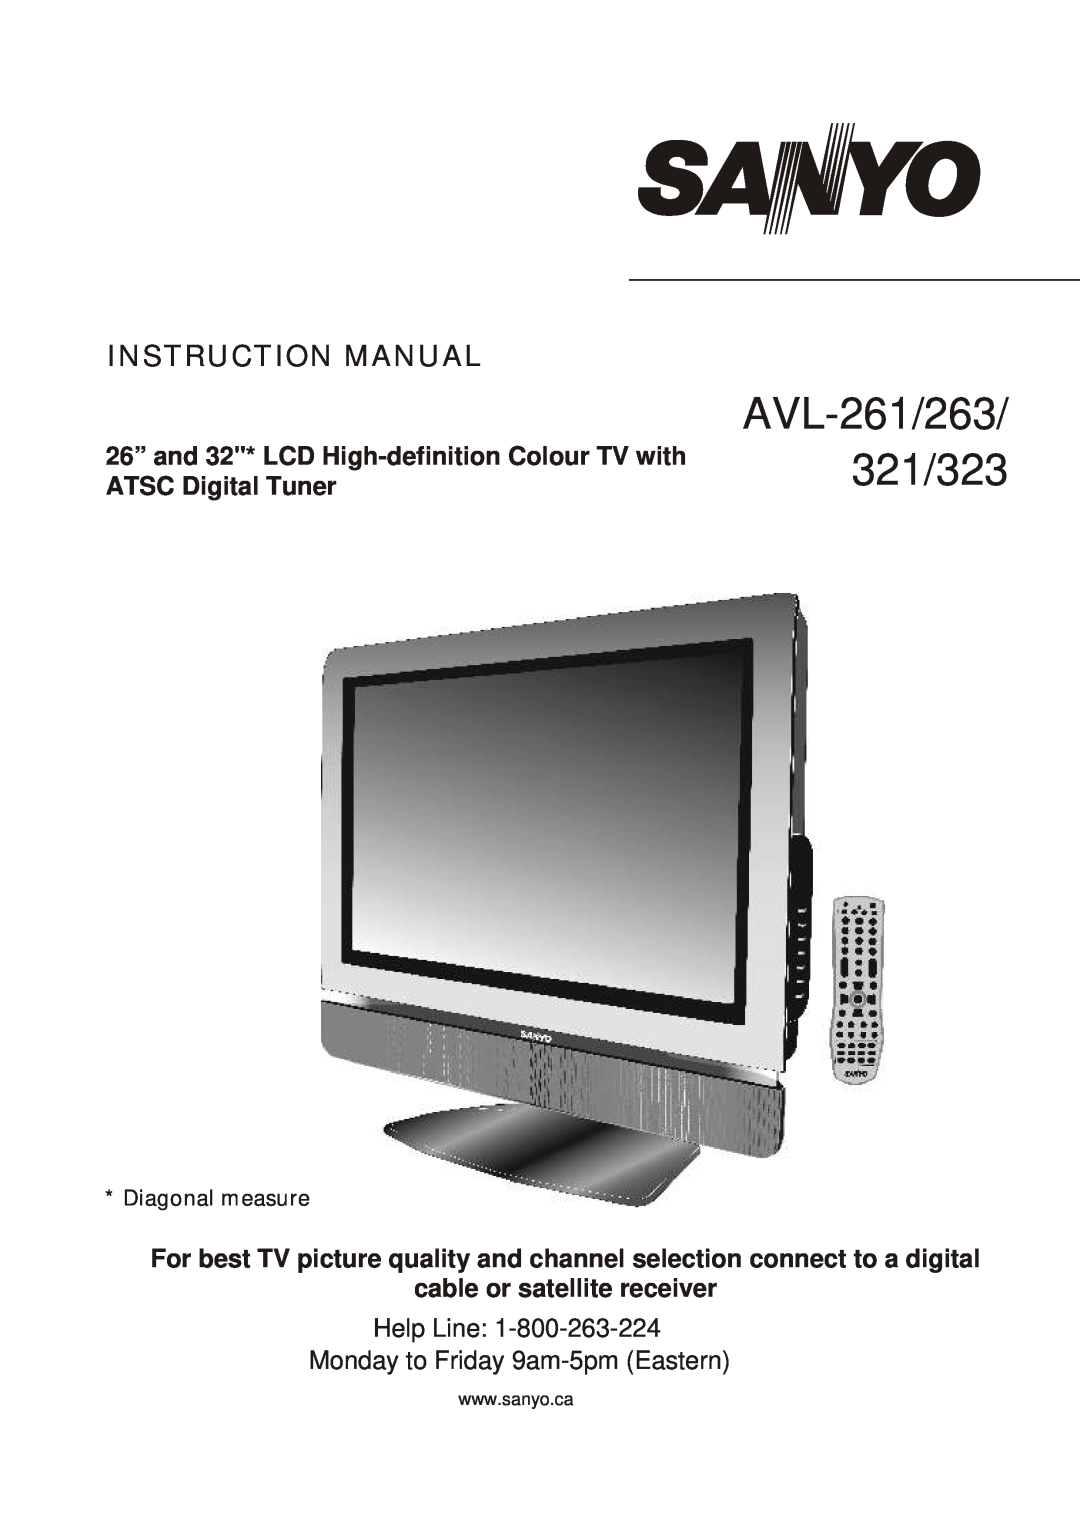 Sanyo instruction manual 26” and 32* LCD High-definition Colour TV with ATSC Digital Tuner, AVL-261/263/ 321/323 